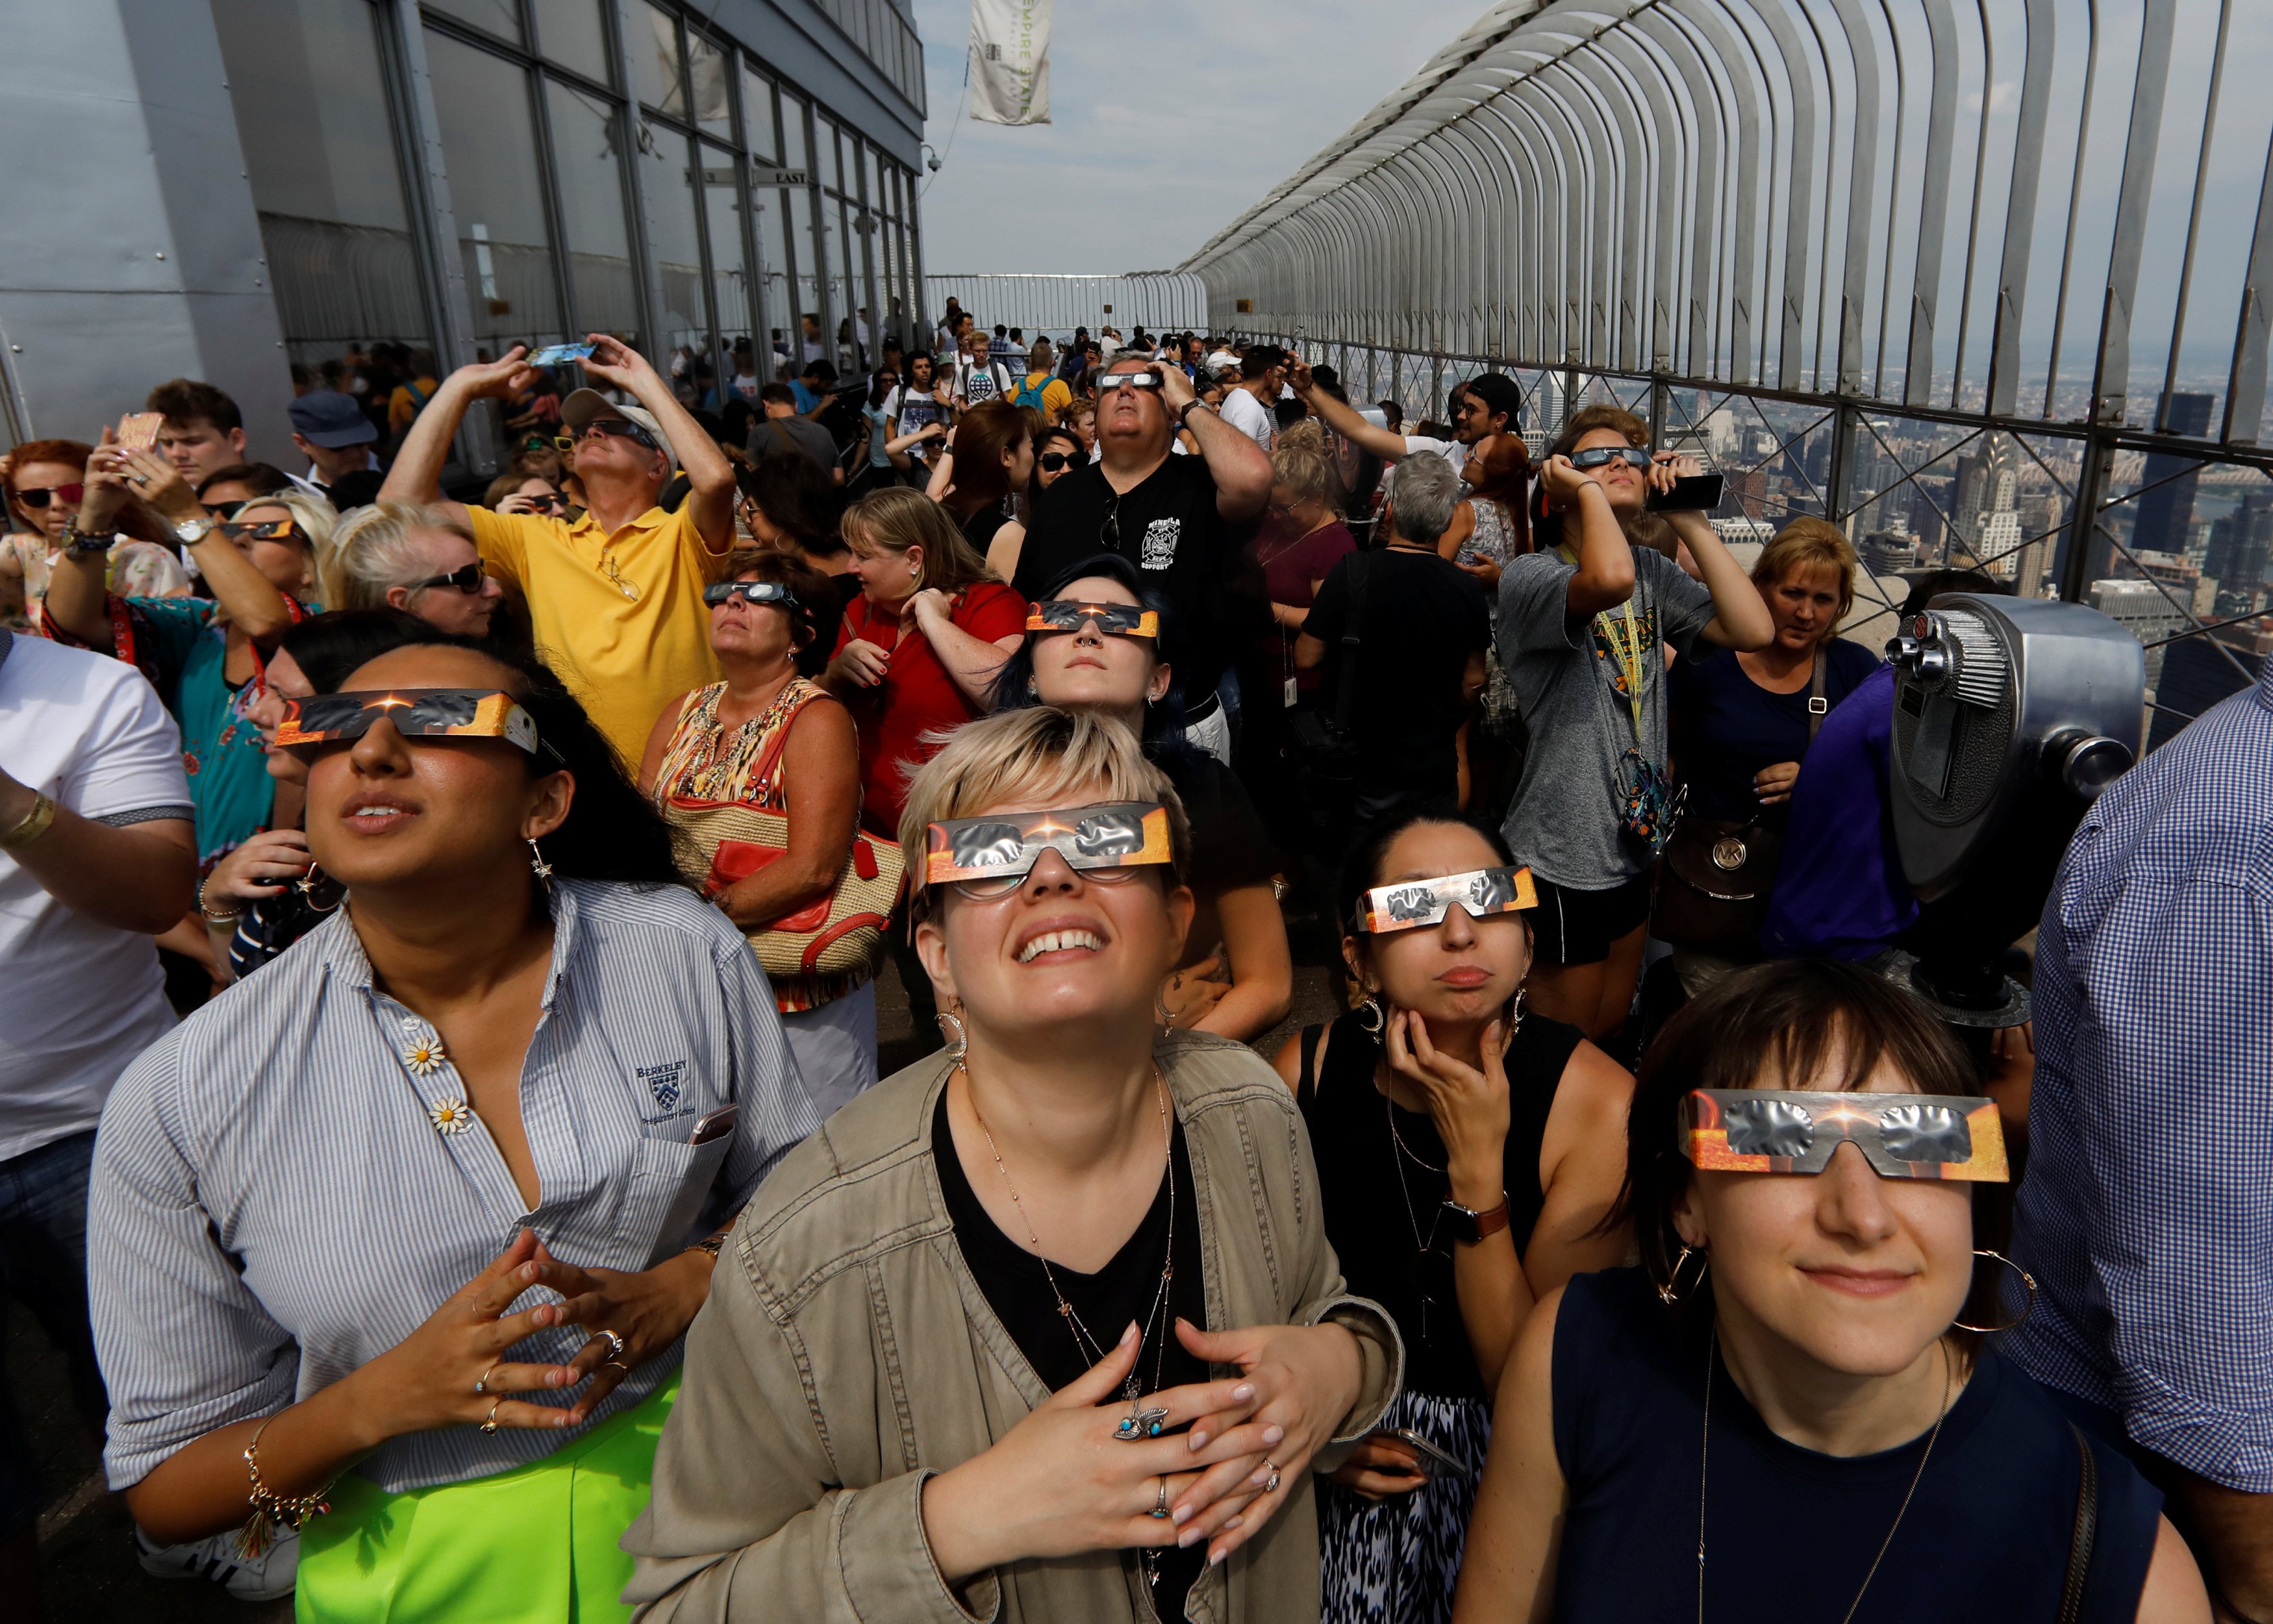 People watch the solar eclipse from the observation deck of The Empire State Building in New York City on Aug. 21, 2017. (Brendan McDermid—Reuters)